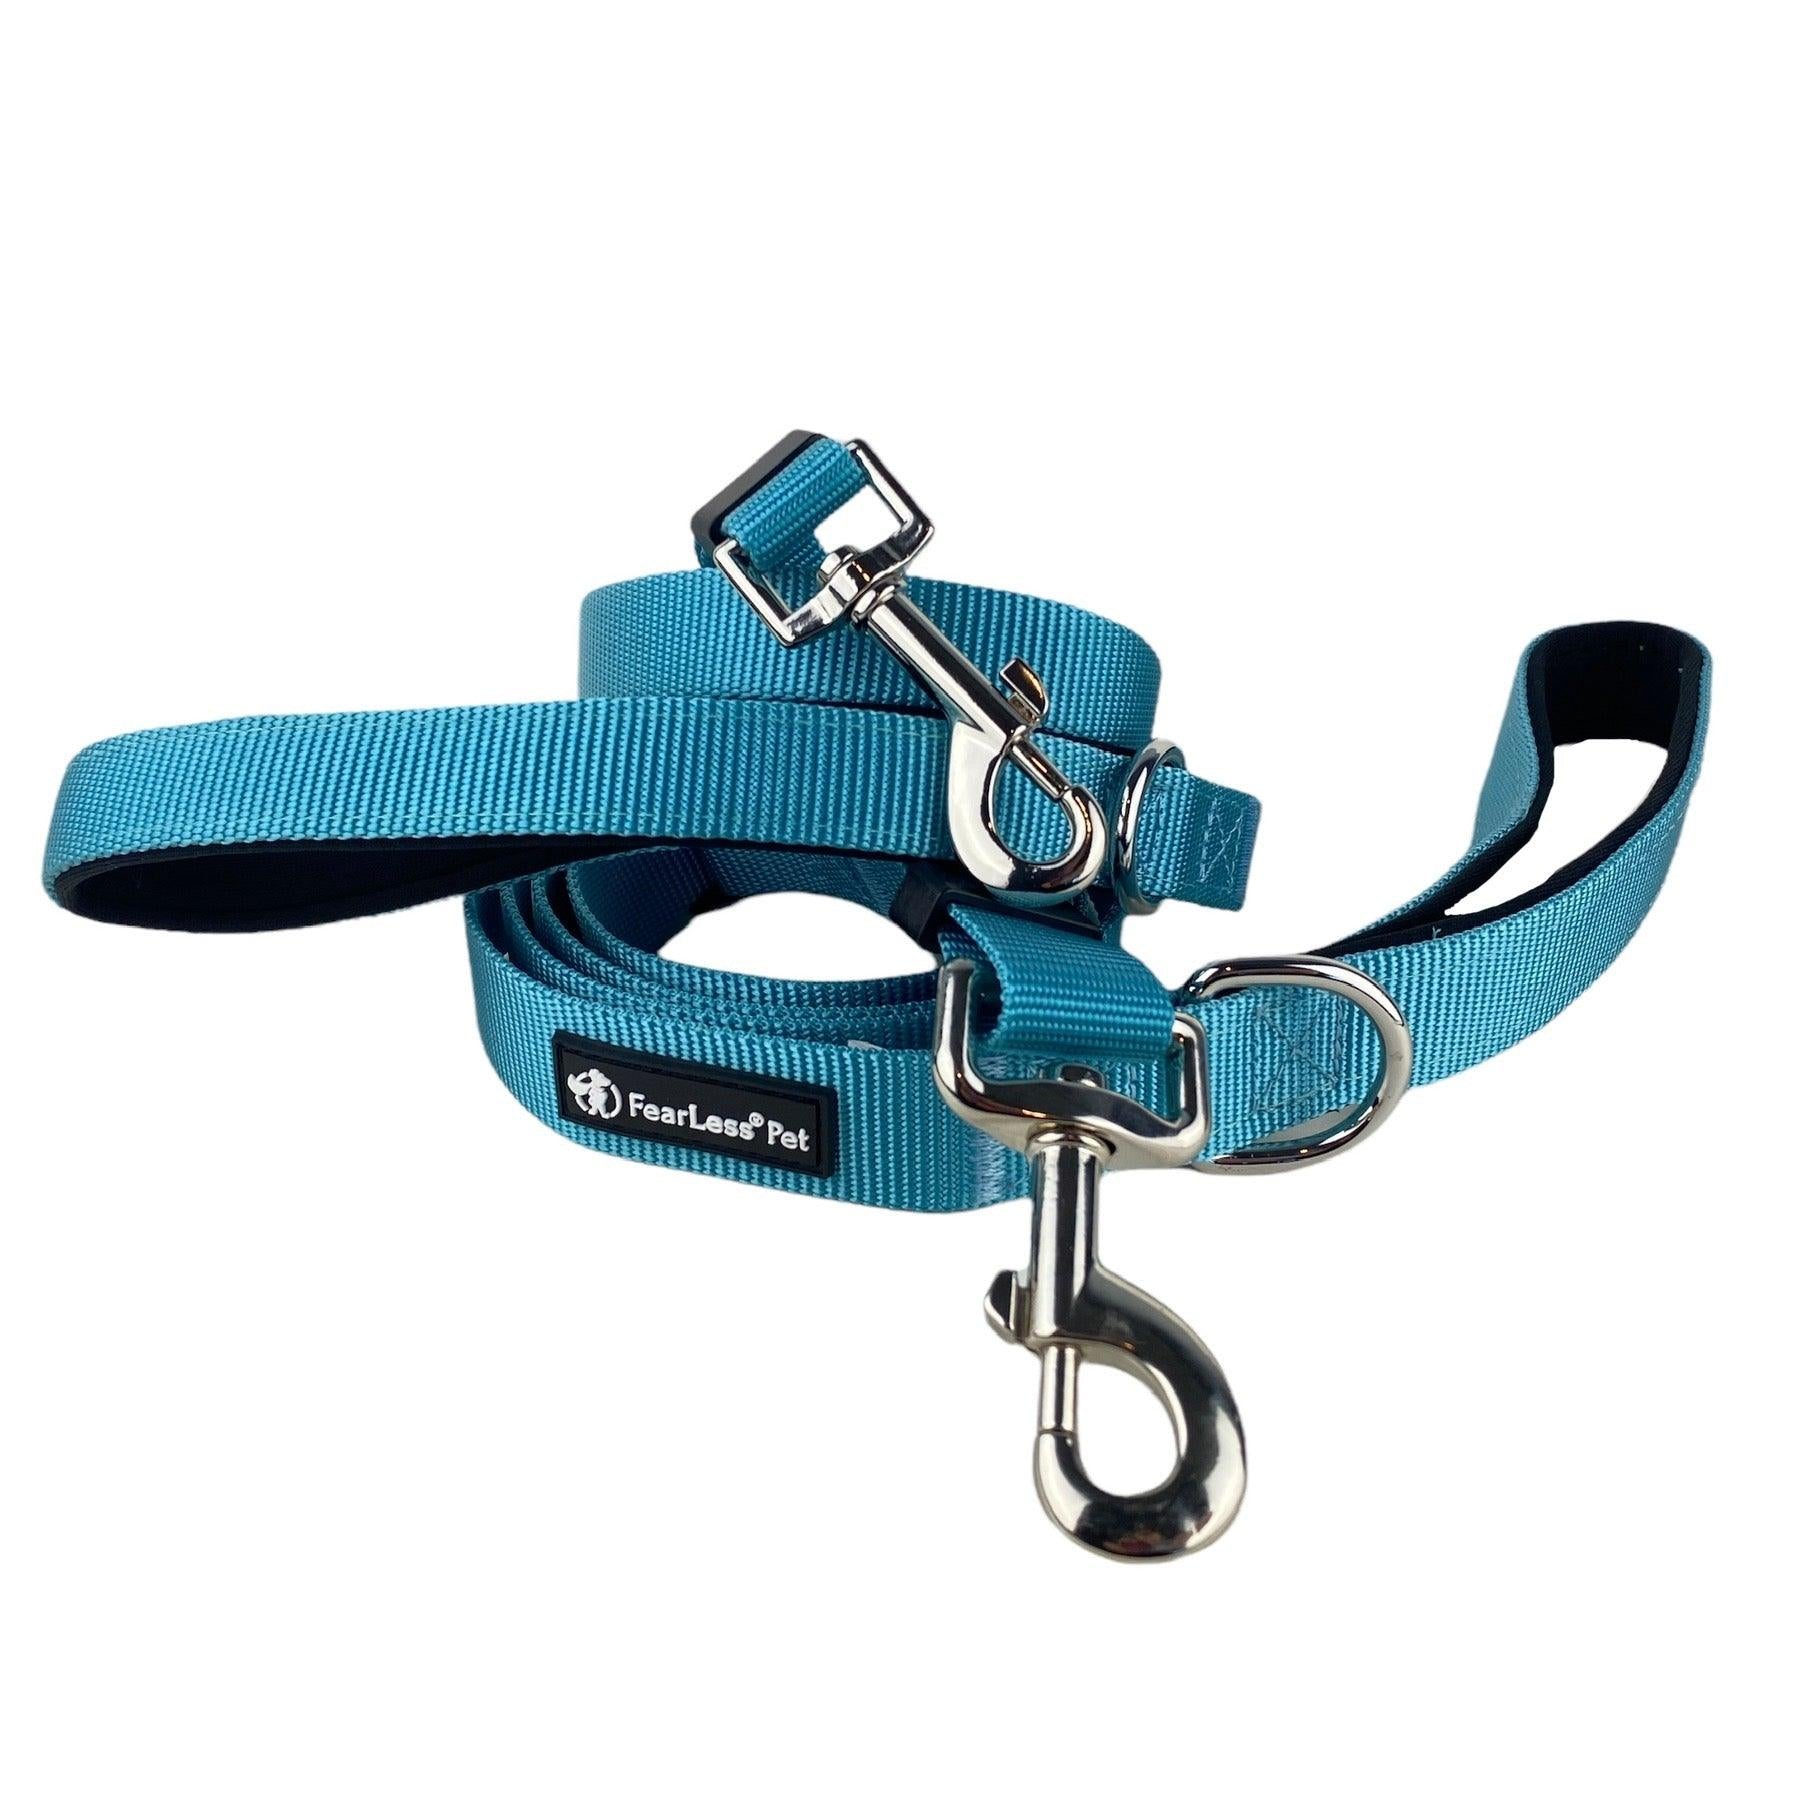 A photo of two teal blue leashes that are adjustable and feature a padded handle from fearless pet